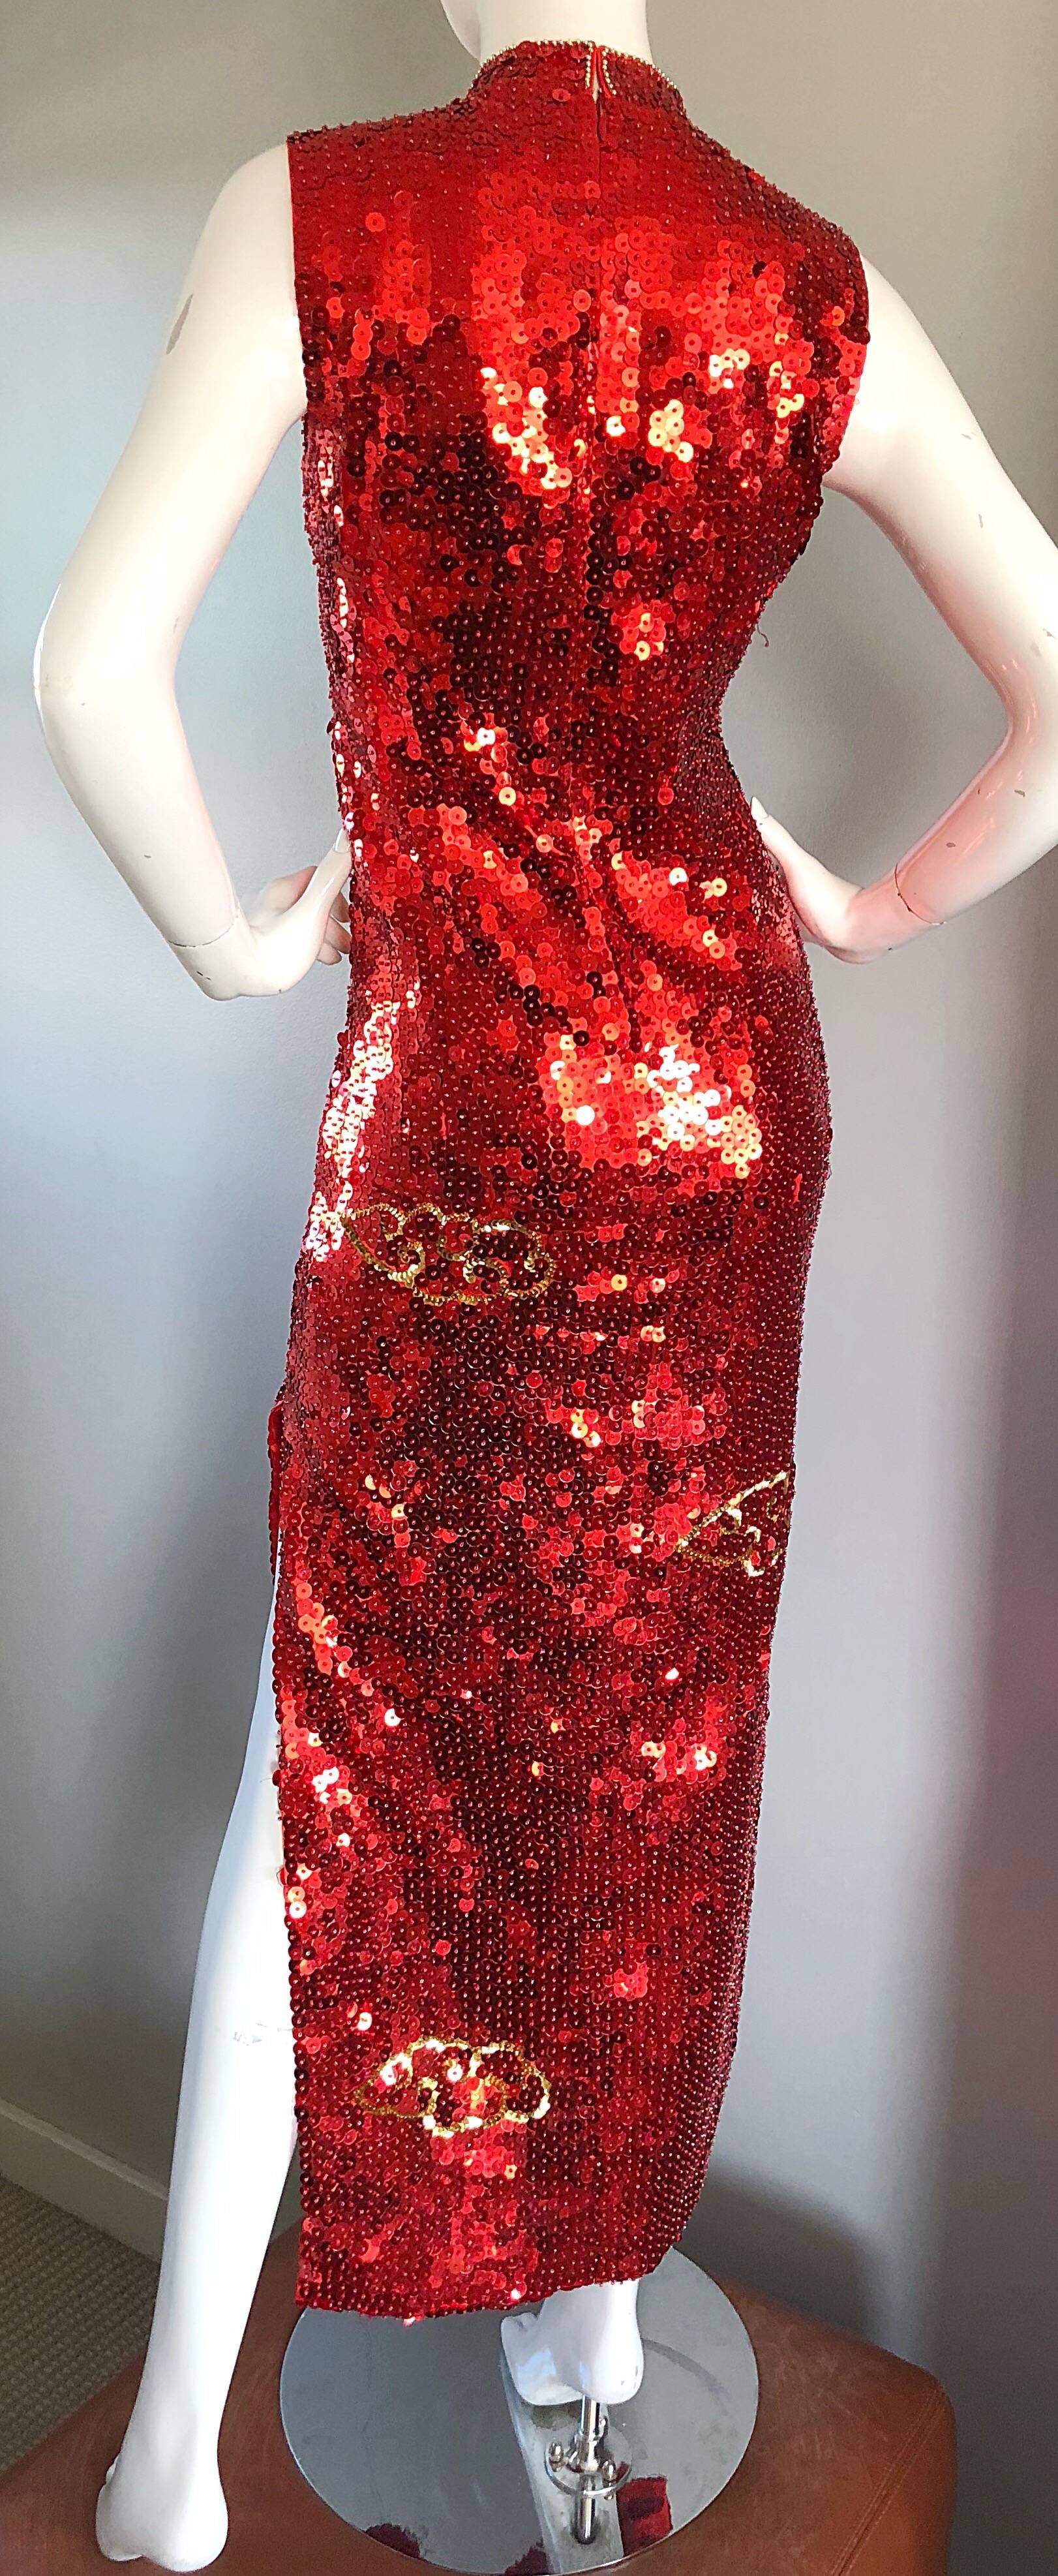 Women's Vintage Red and Gold Fully Sequined Dragon + Cloud Print Novelty Cheongsam Gown